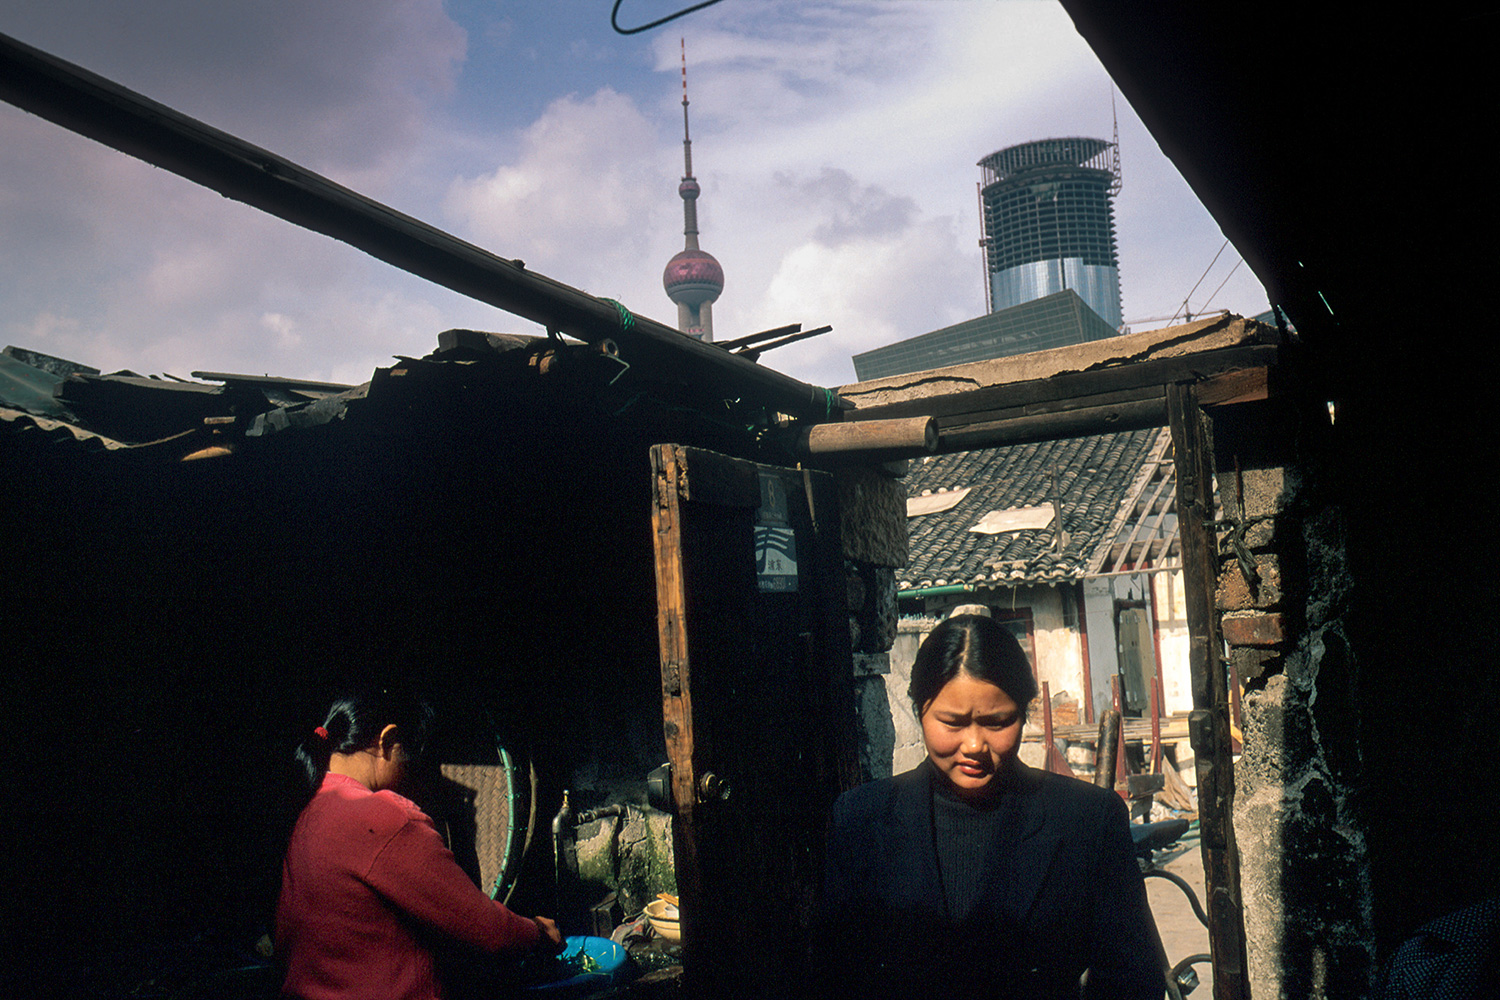 Homes vacated by residents to make way for construction projects were occupied by people from the countryside who came to Pudong to cater to the needs of construction workers, 1996.